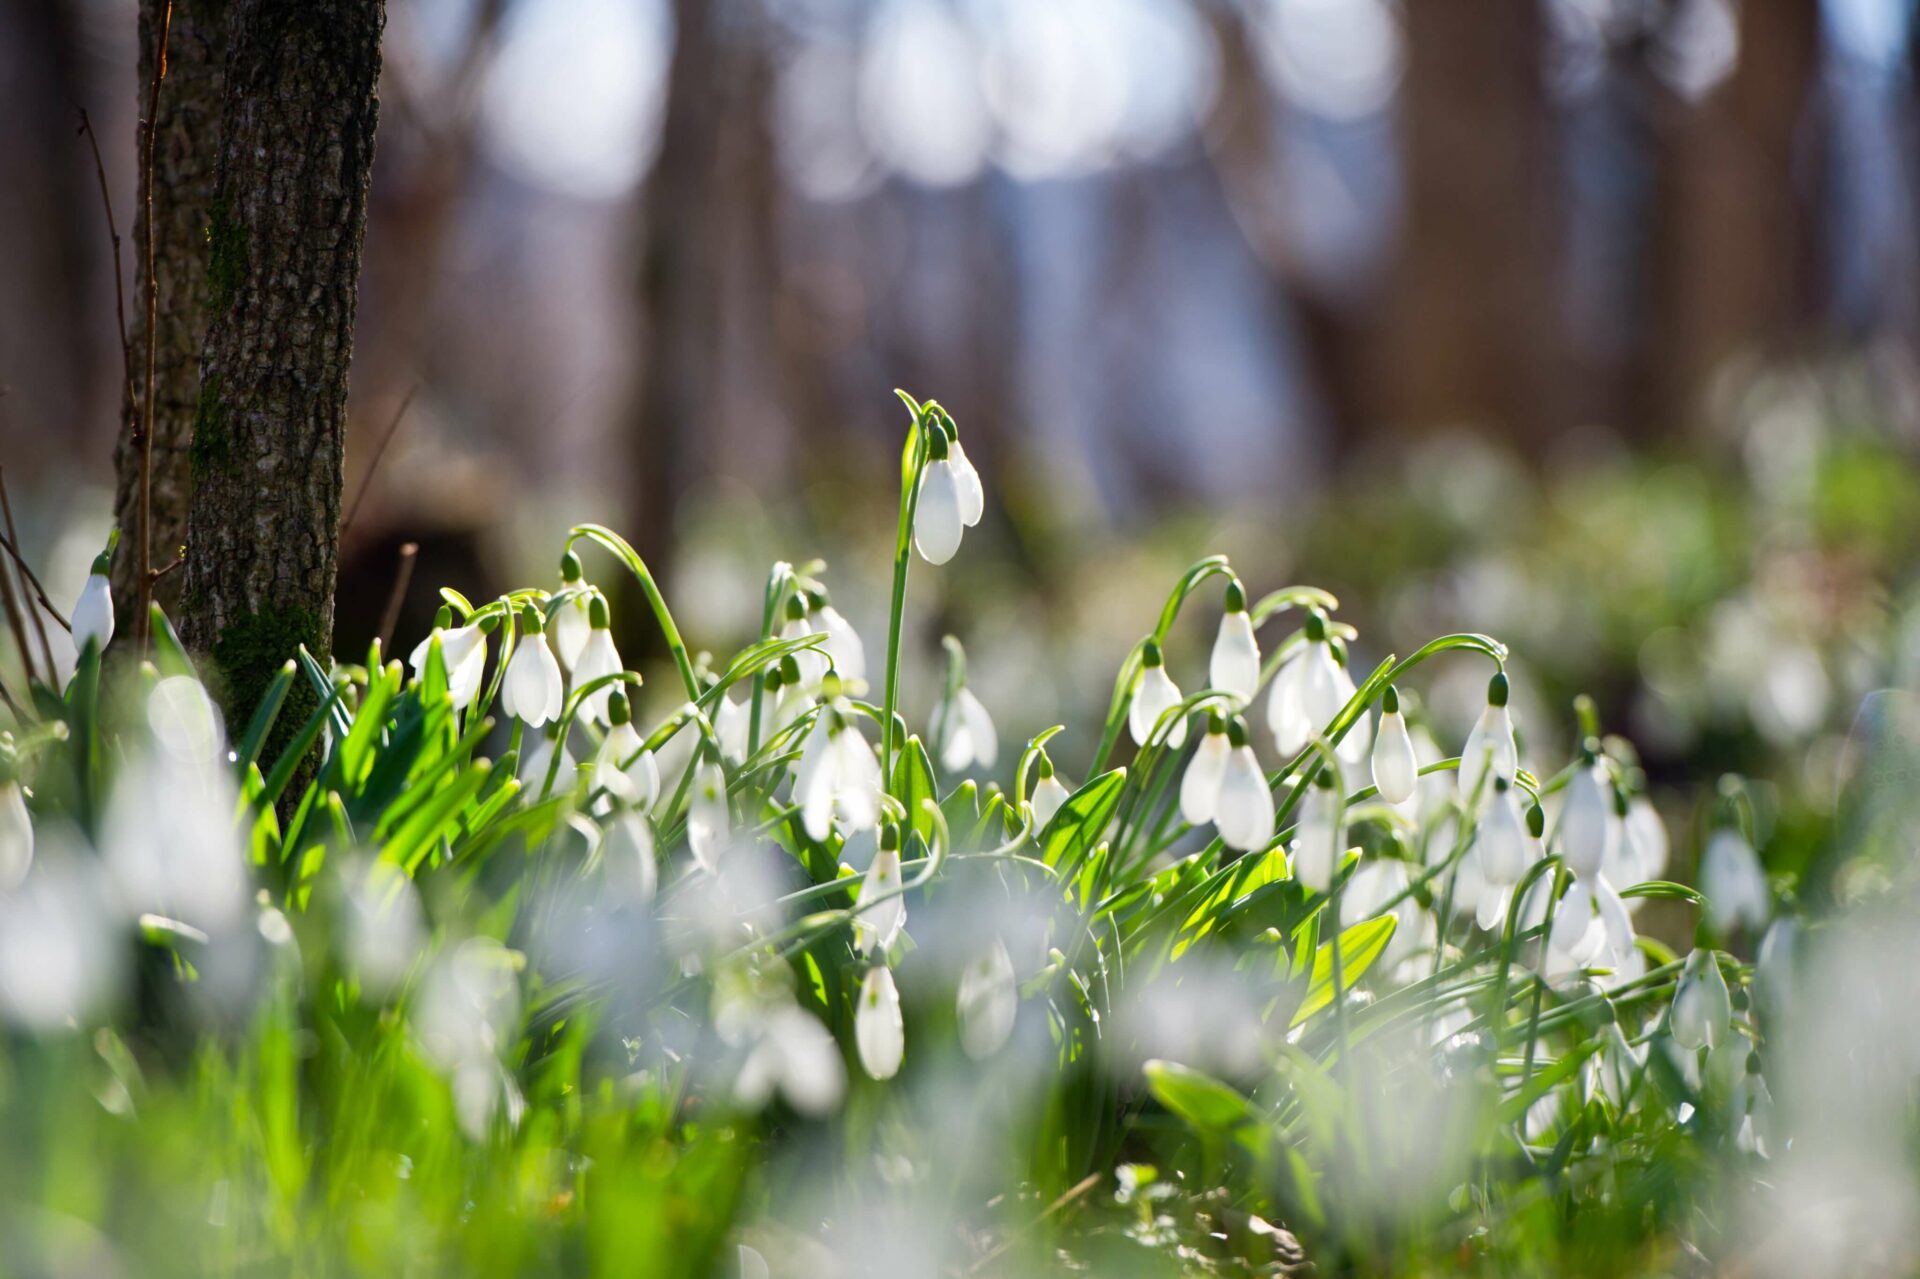 Snow drop flowers, white petals, in the sunlight in a forest